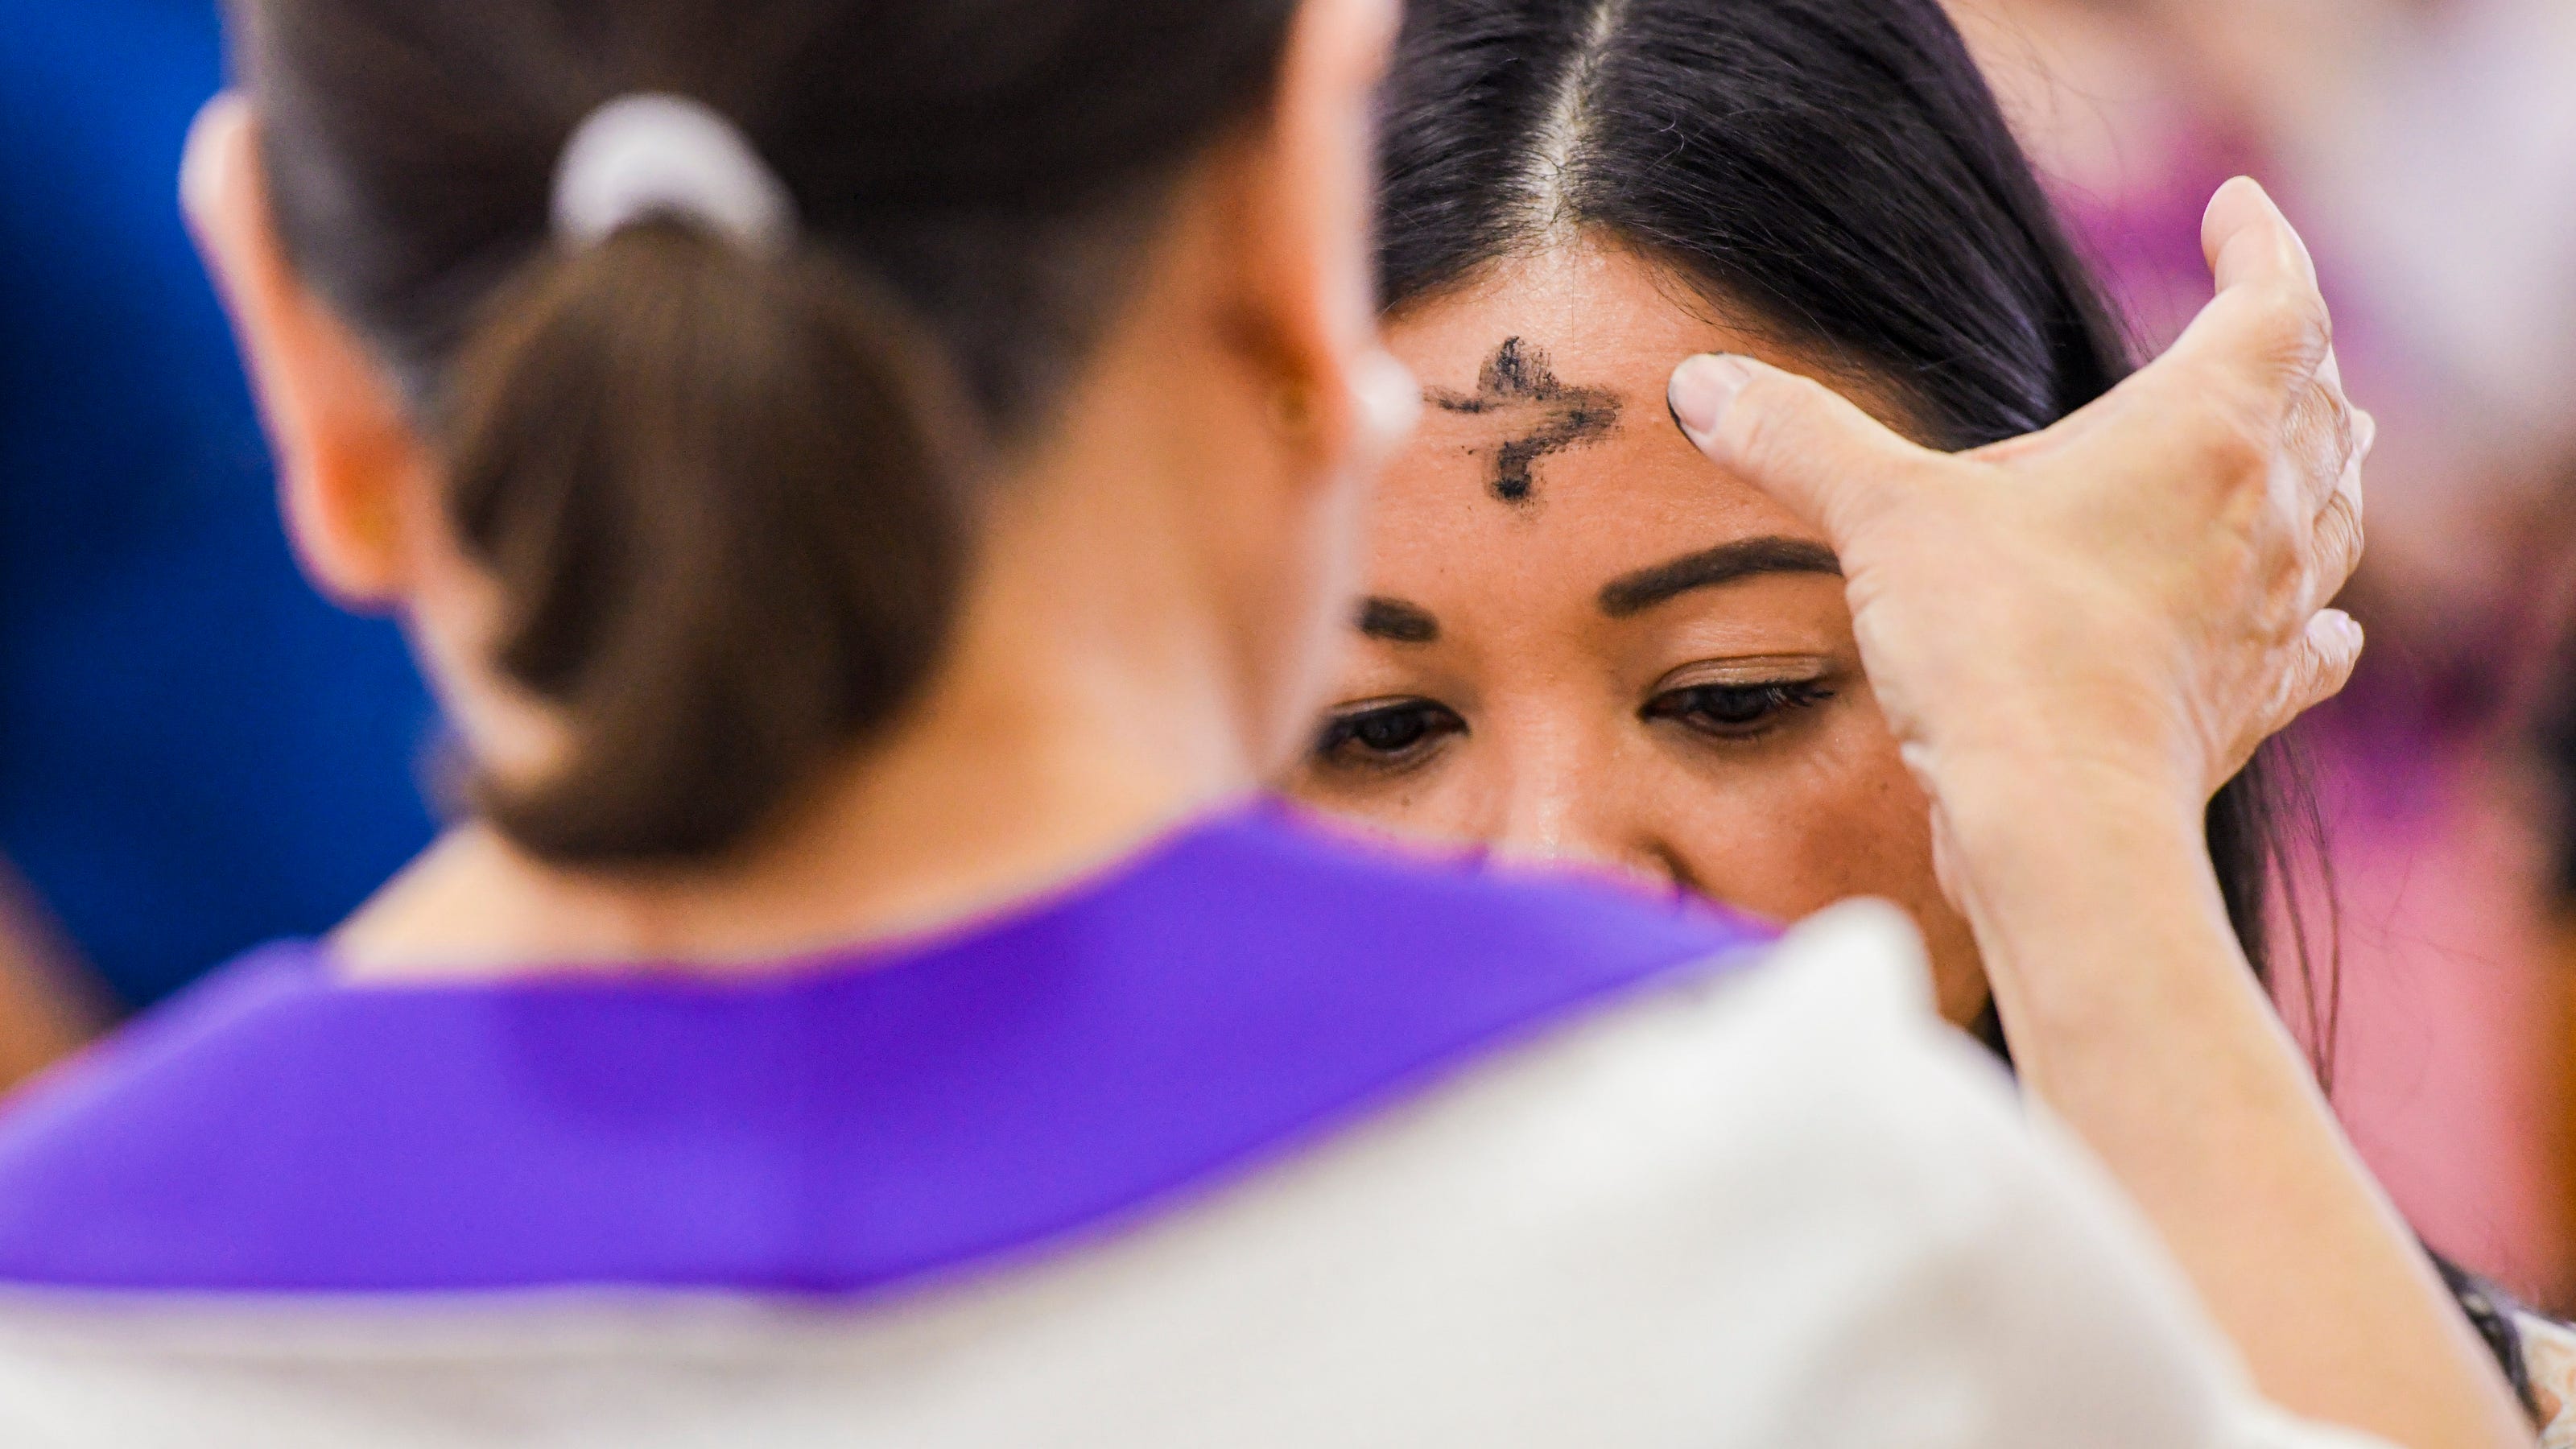 Ash Wednesday 2022 Wearing ashes marks the beginning of Lent